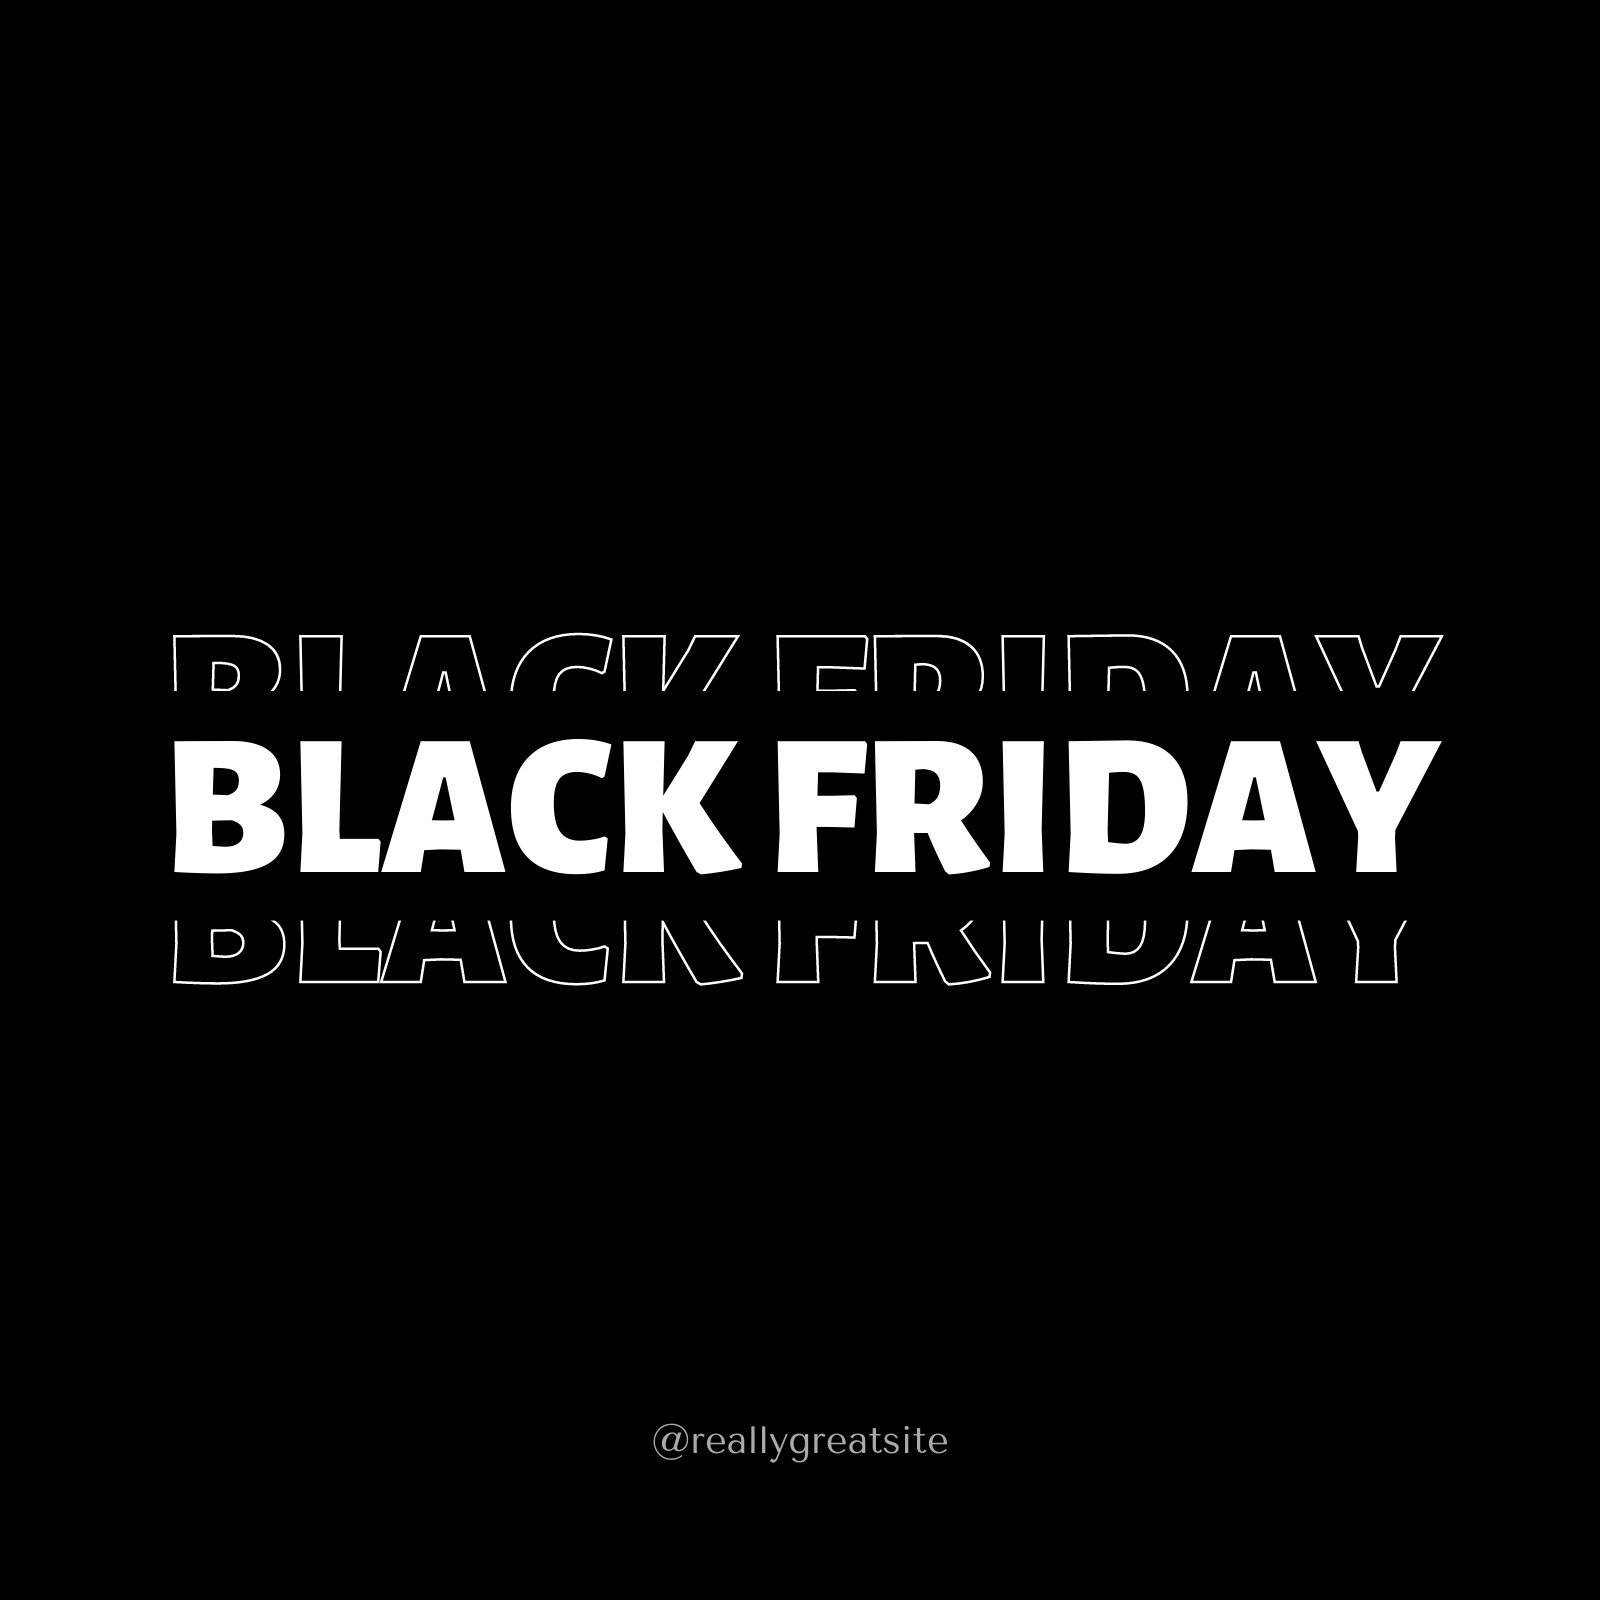 Free and customizable black friday templates